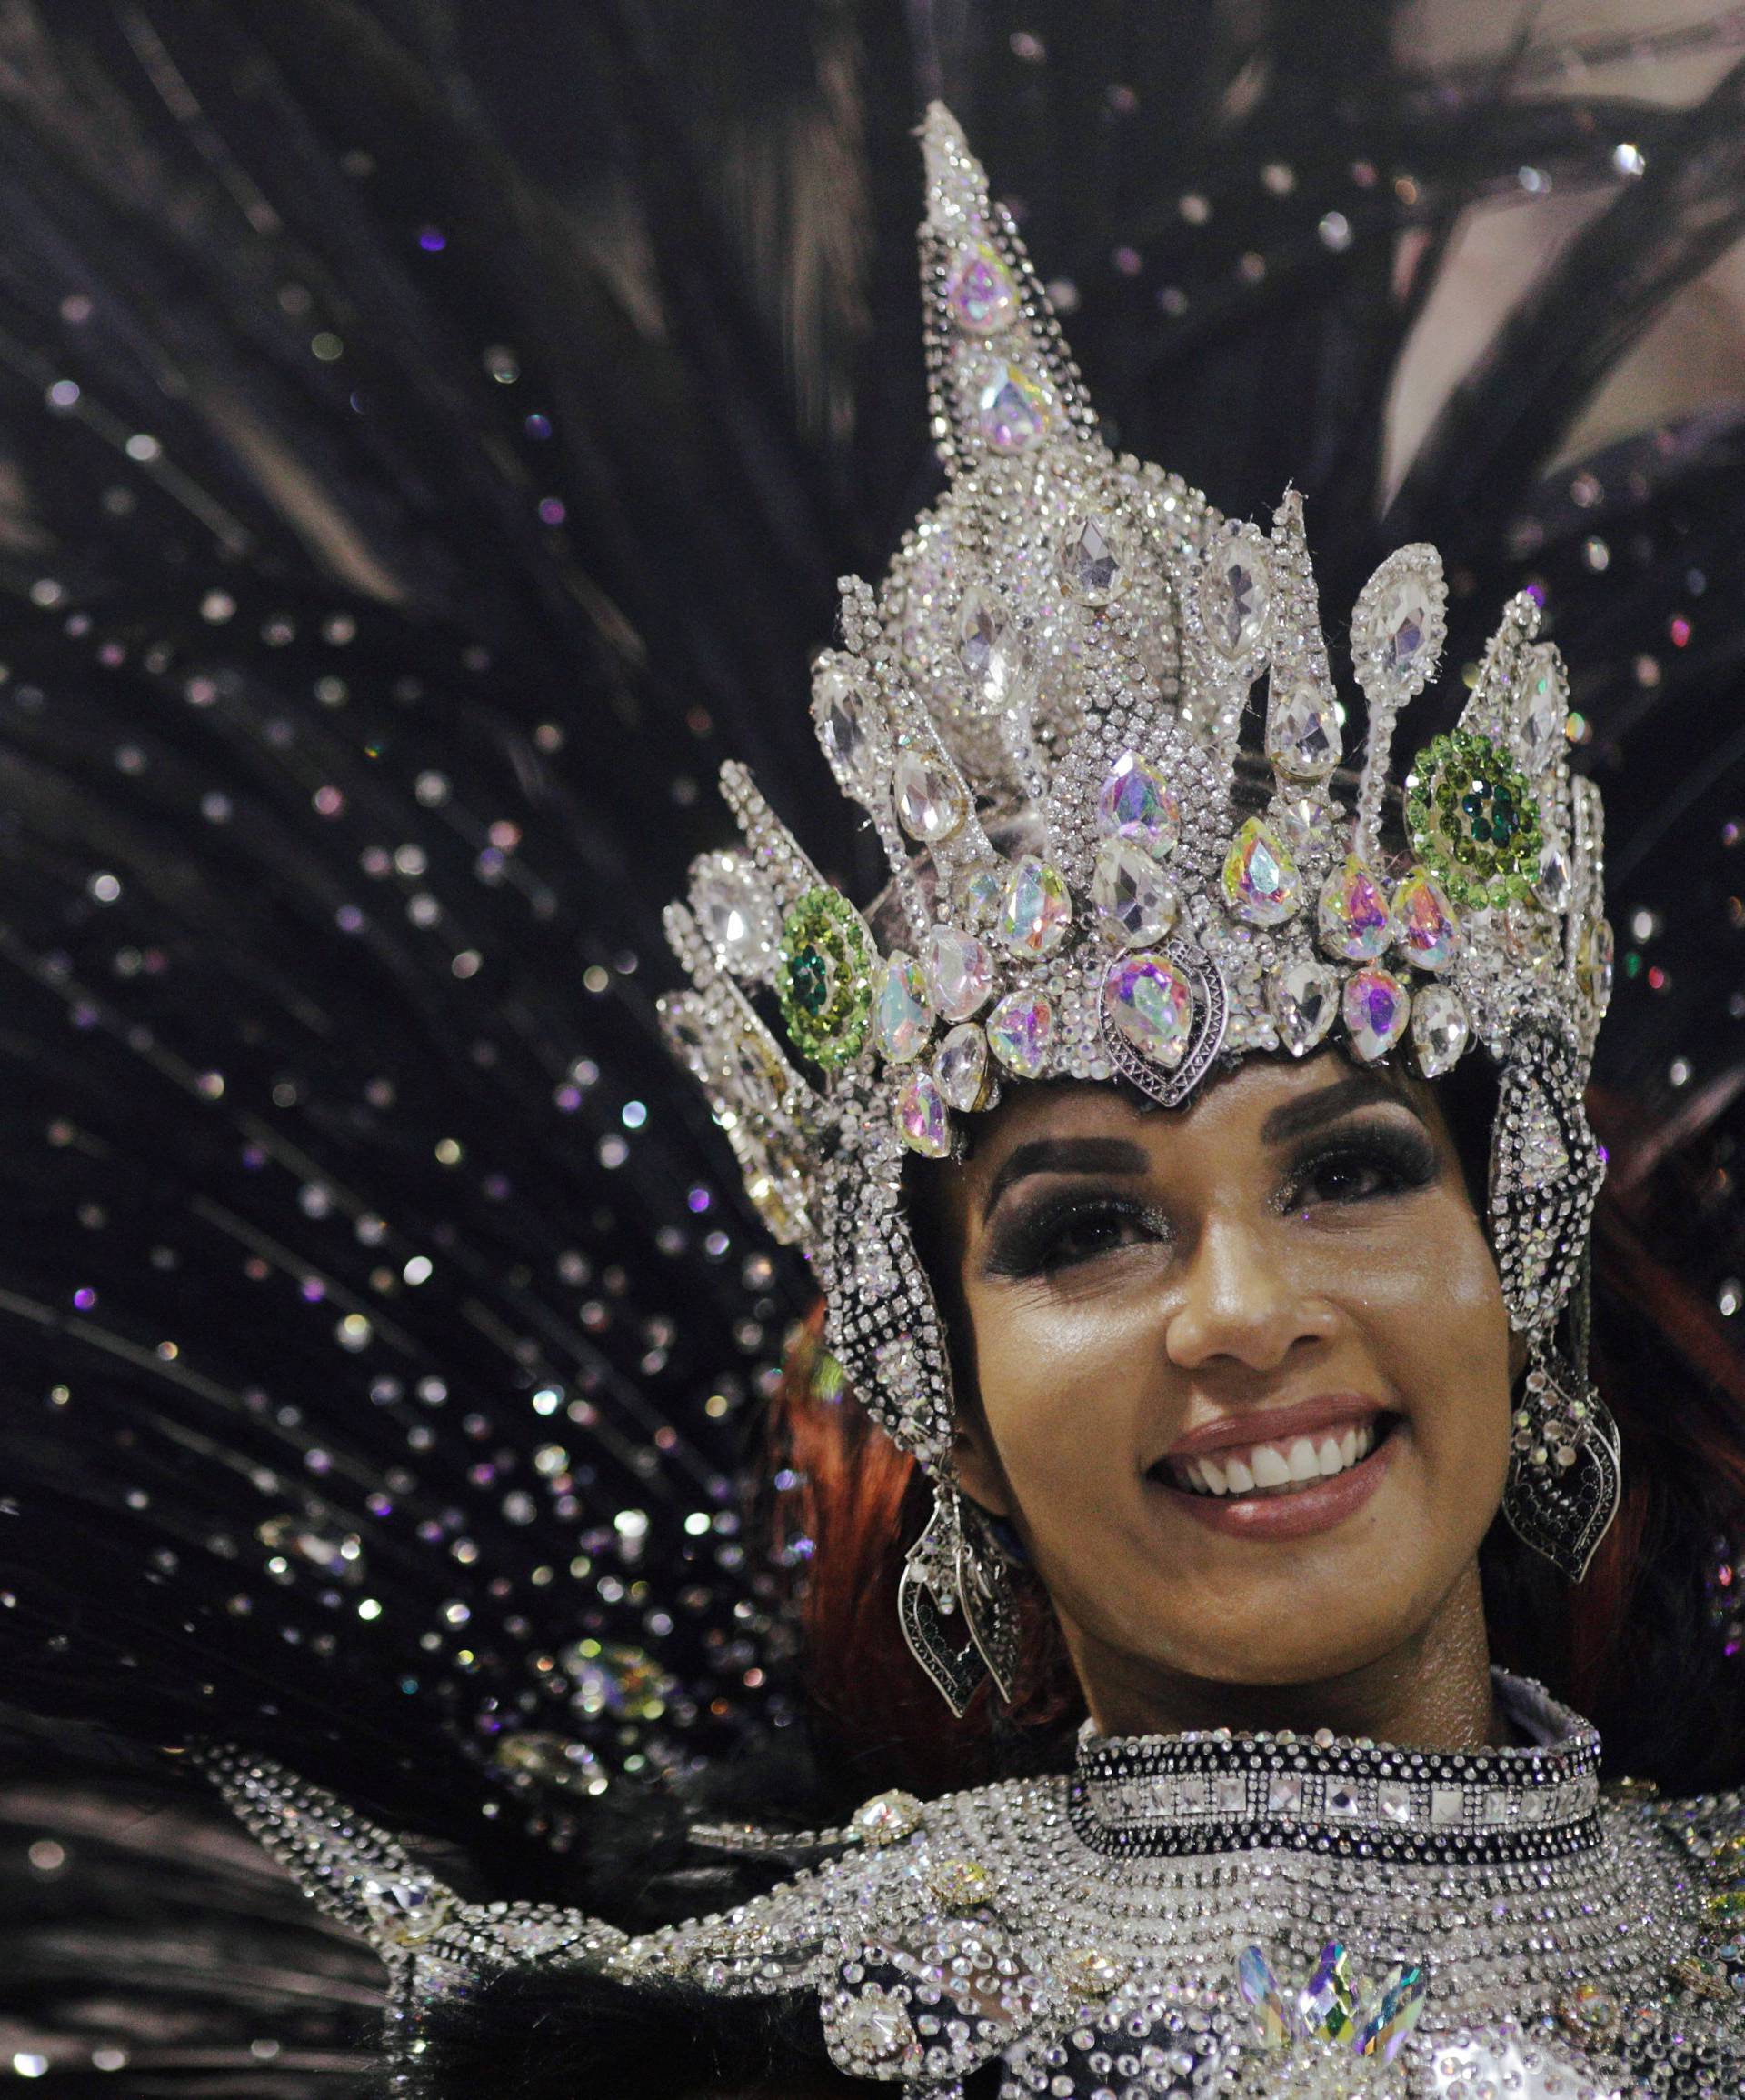 Drum queen Milena Nogueira from Imperio Serrano samba school performs during the first night of the Carnival parade at the Sambadrome in Rio de Janeiro